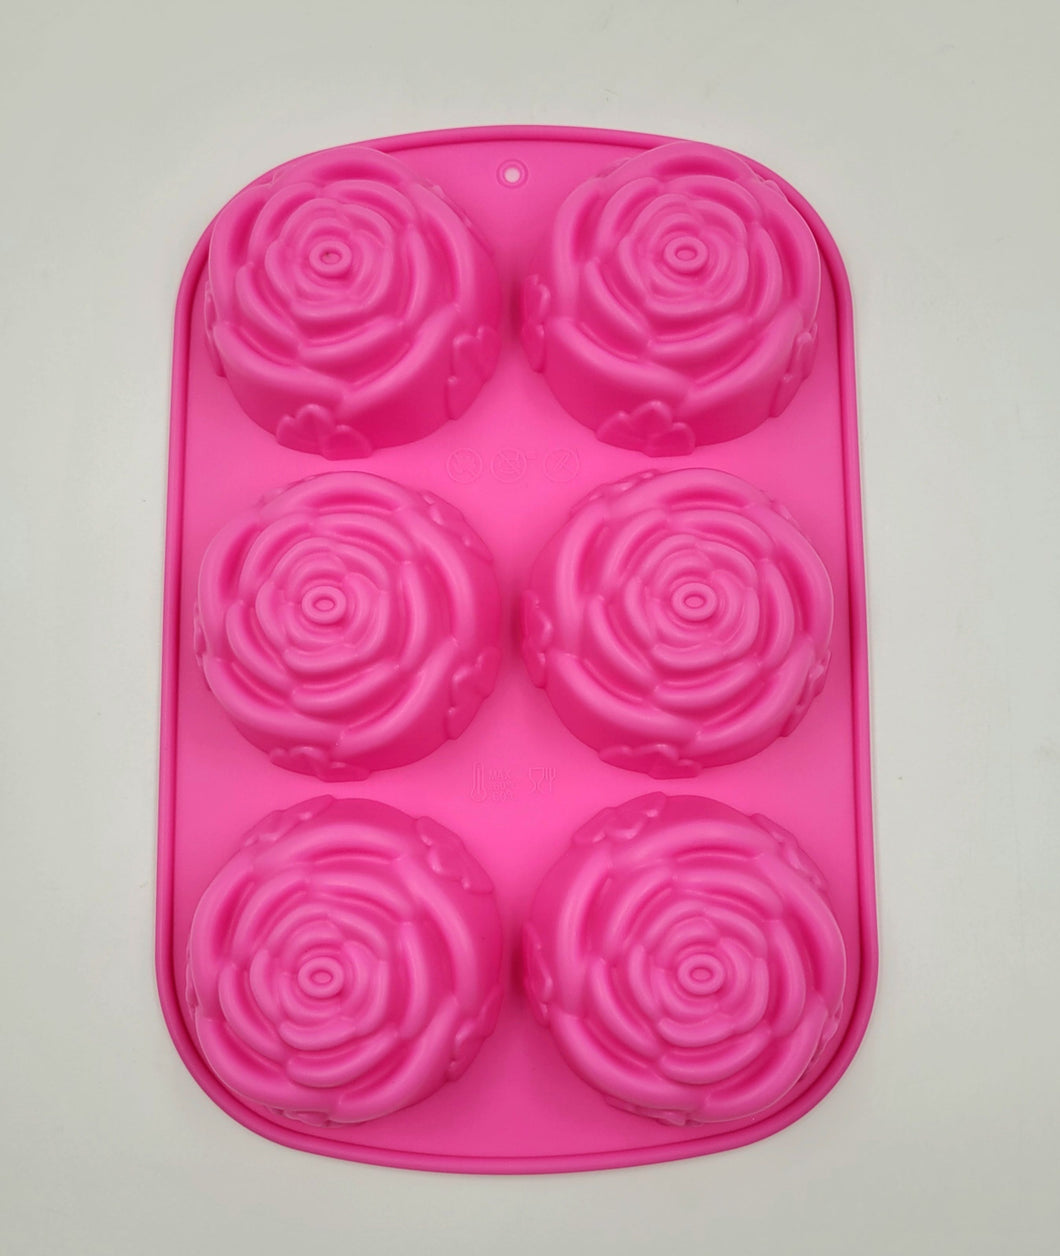 SILICONE ROSE MOLD APPROX. 3